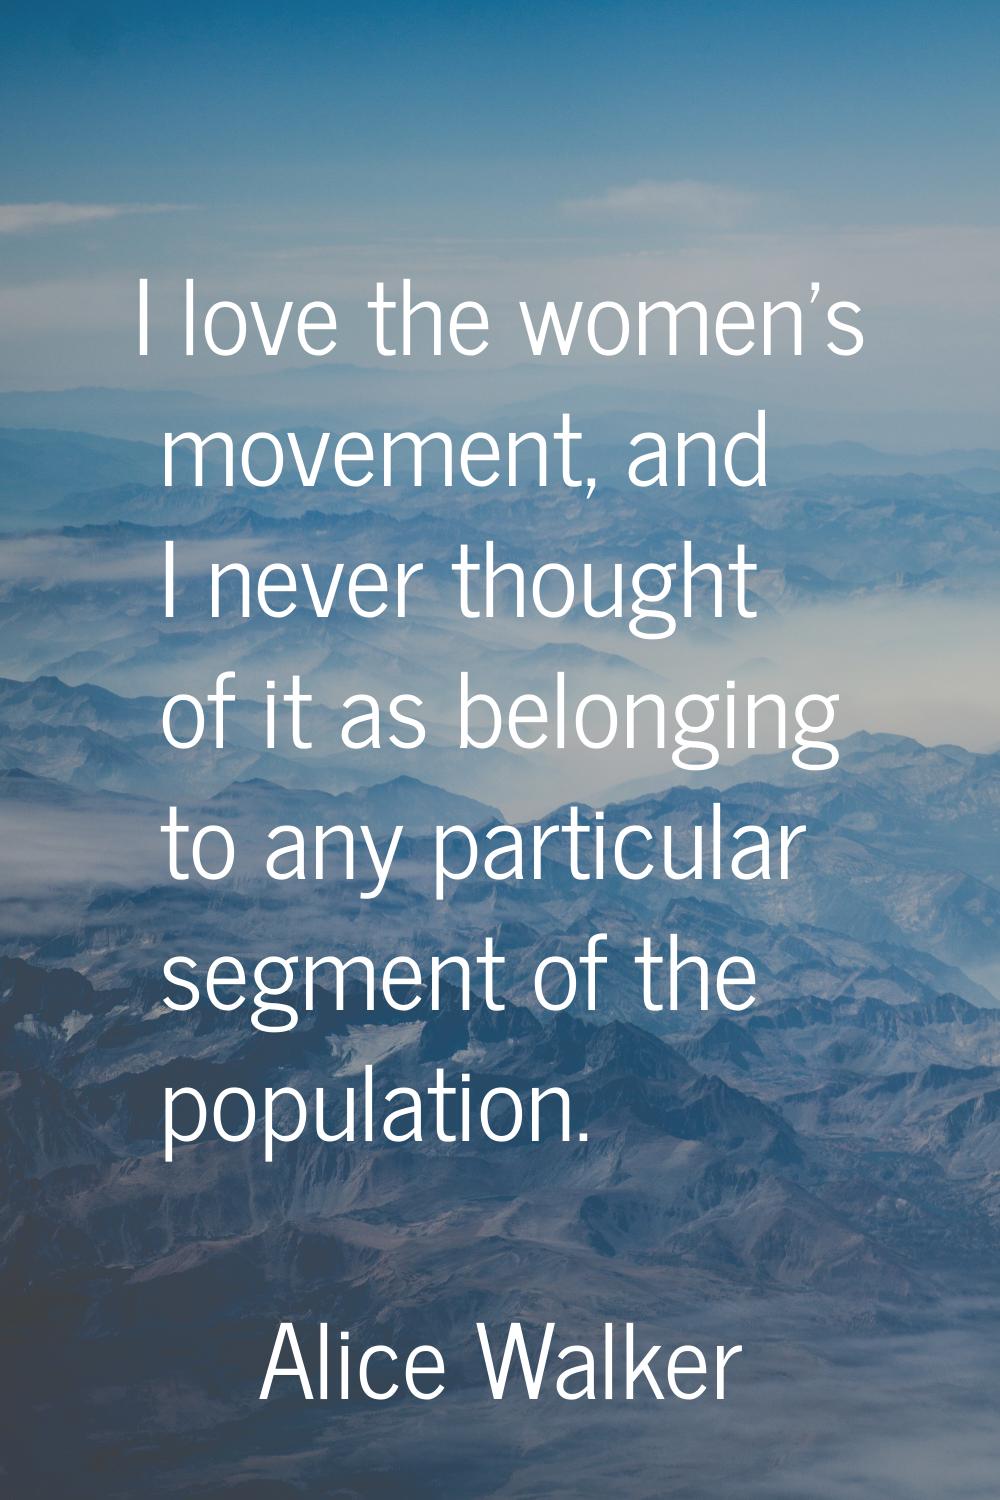 I love the women's movement, and I never thought of it as belonging to any particular segment of th